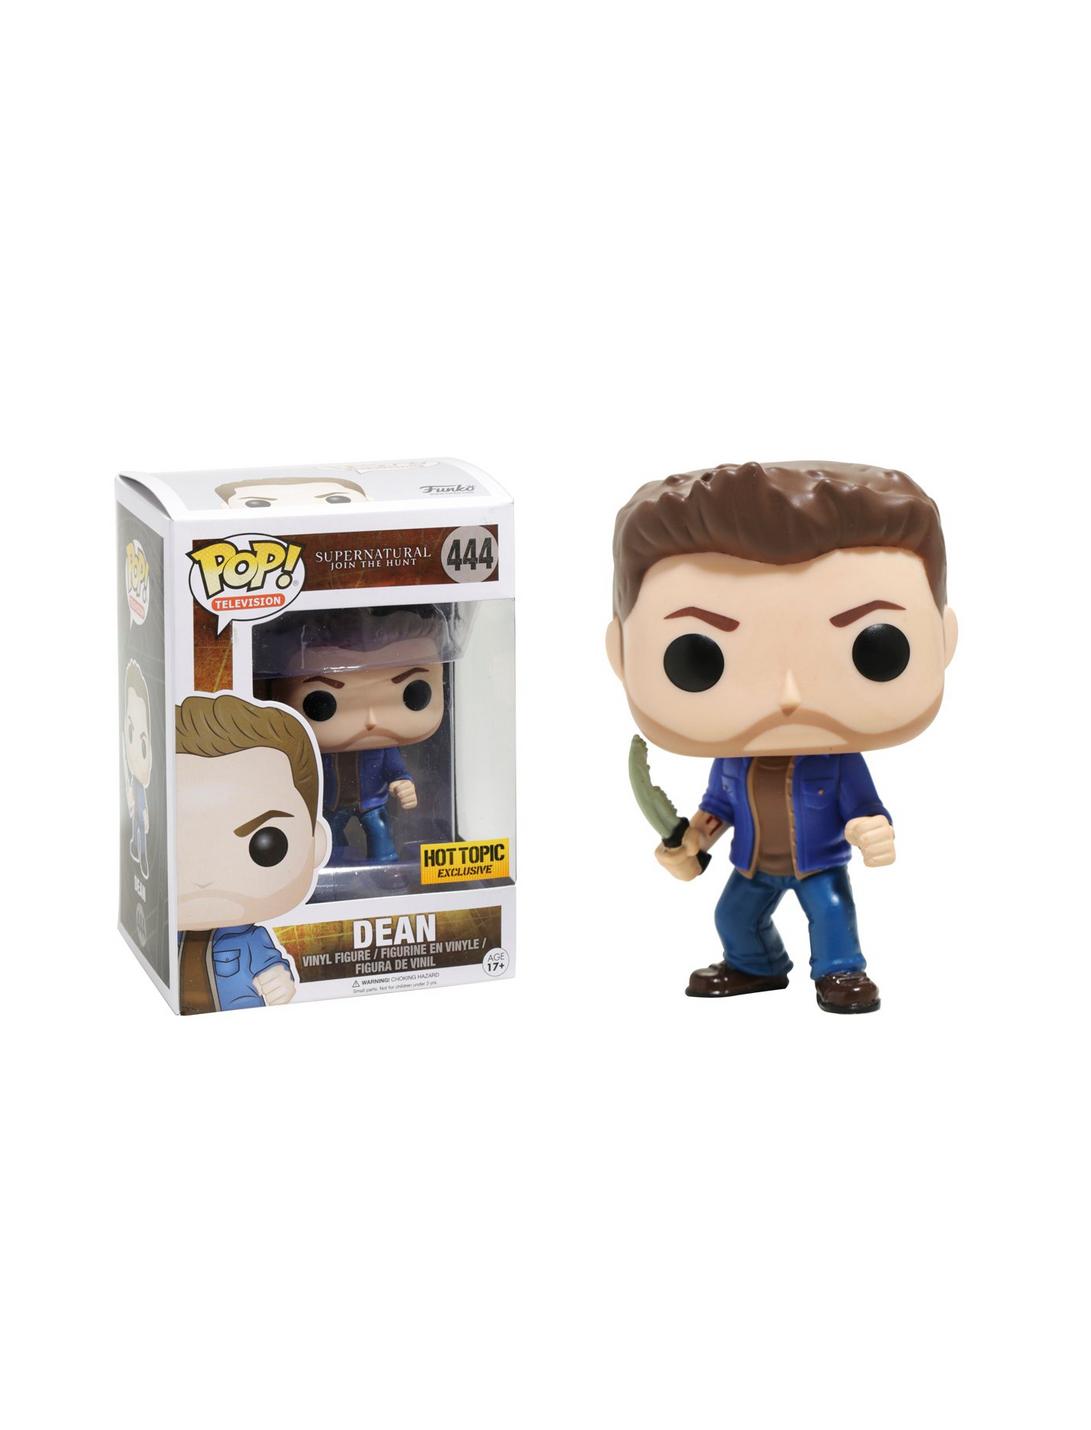 VINYL SUPERNATURAL DEAN WITH FIRST BLADE & MARK OF CAIN EXC FUNKO POP